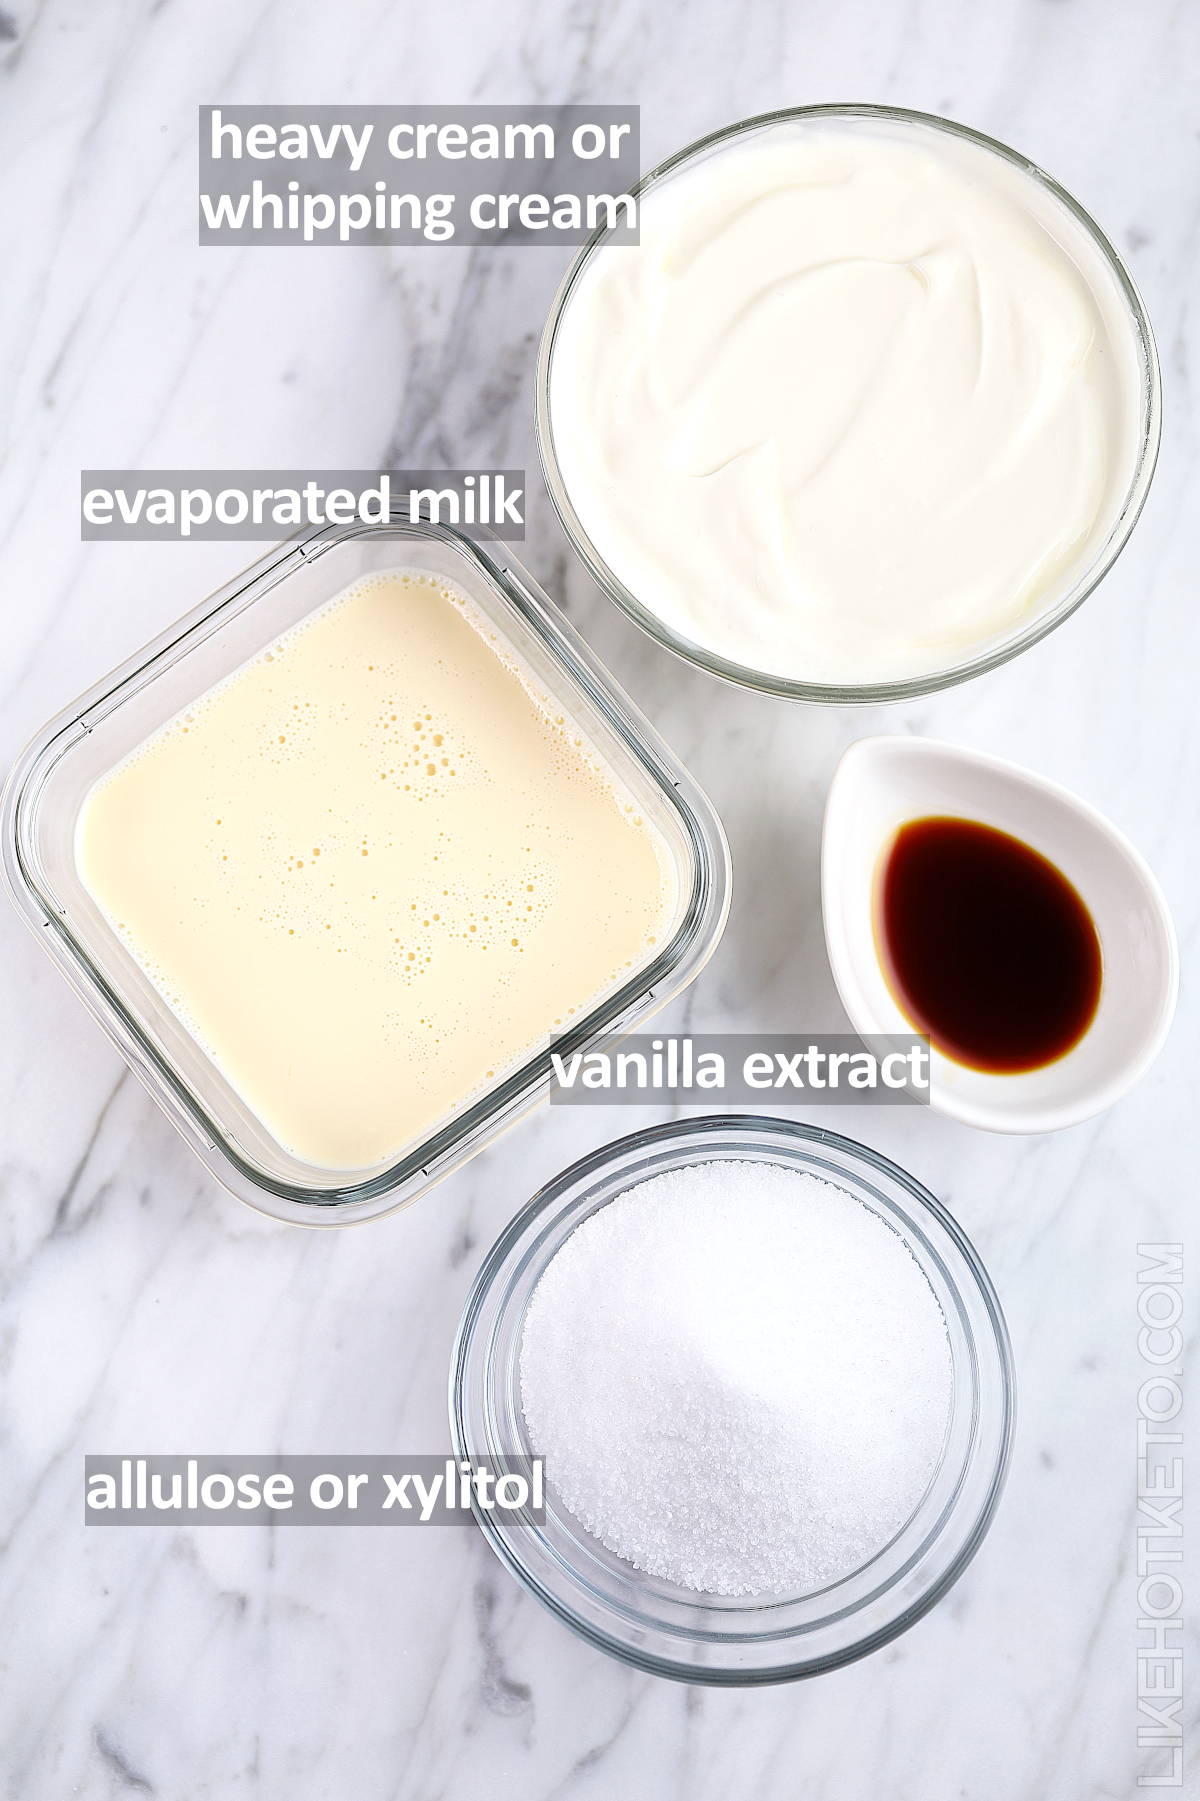 Ingredients for making keto dulce de leche caramel: heavy cream, sweetener, evaporated milk and sugar-free vanilla extract.